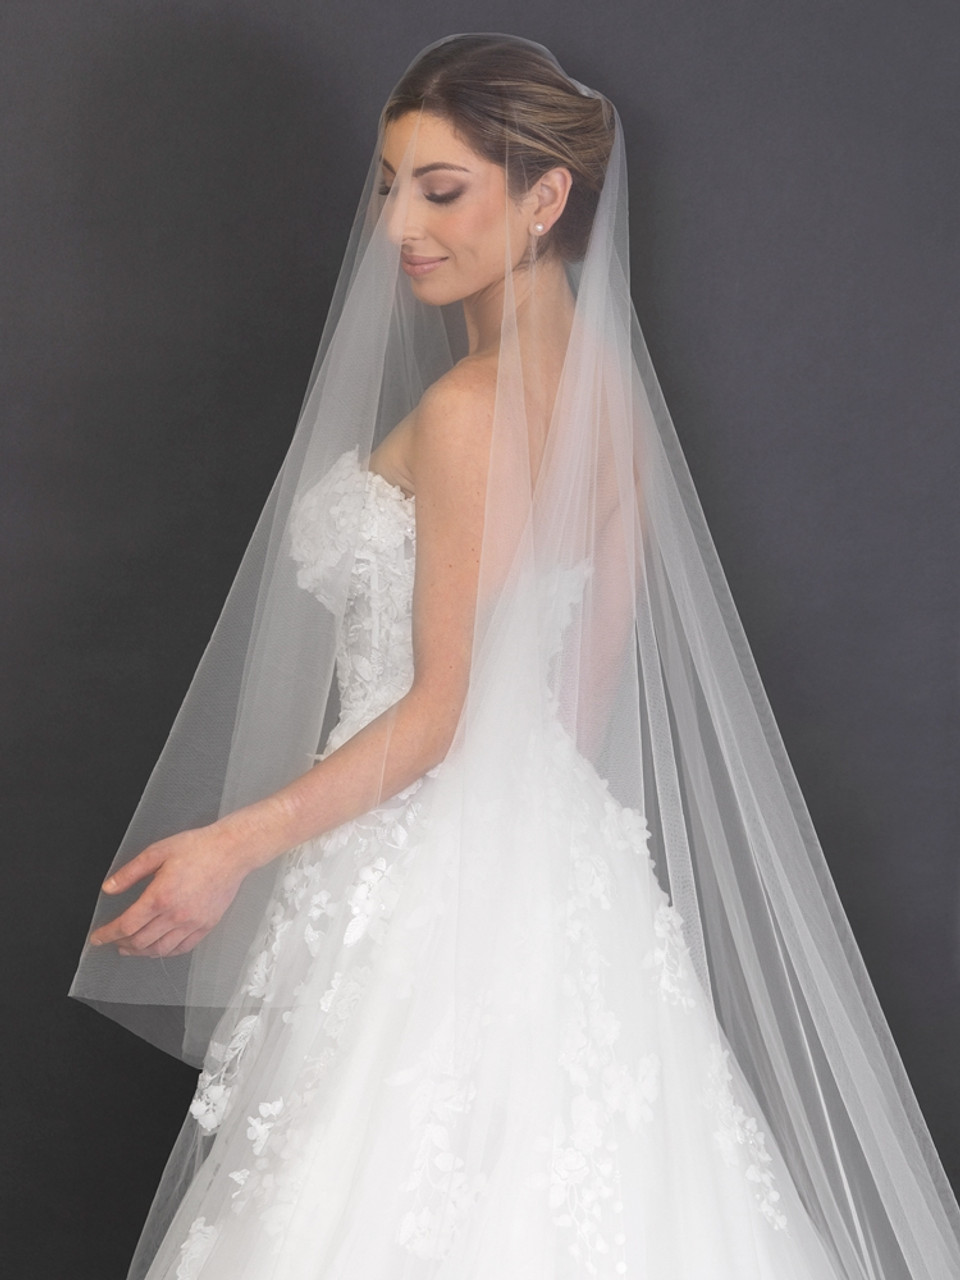 Ursumy Wedding Veil Bridal Cathedral Length Veil 2 Tier Soft Tulle  Bridemaid Veils with Comb 118